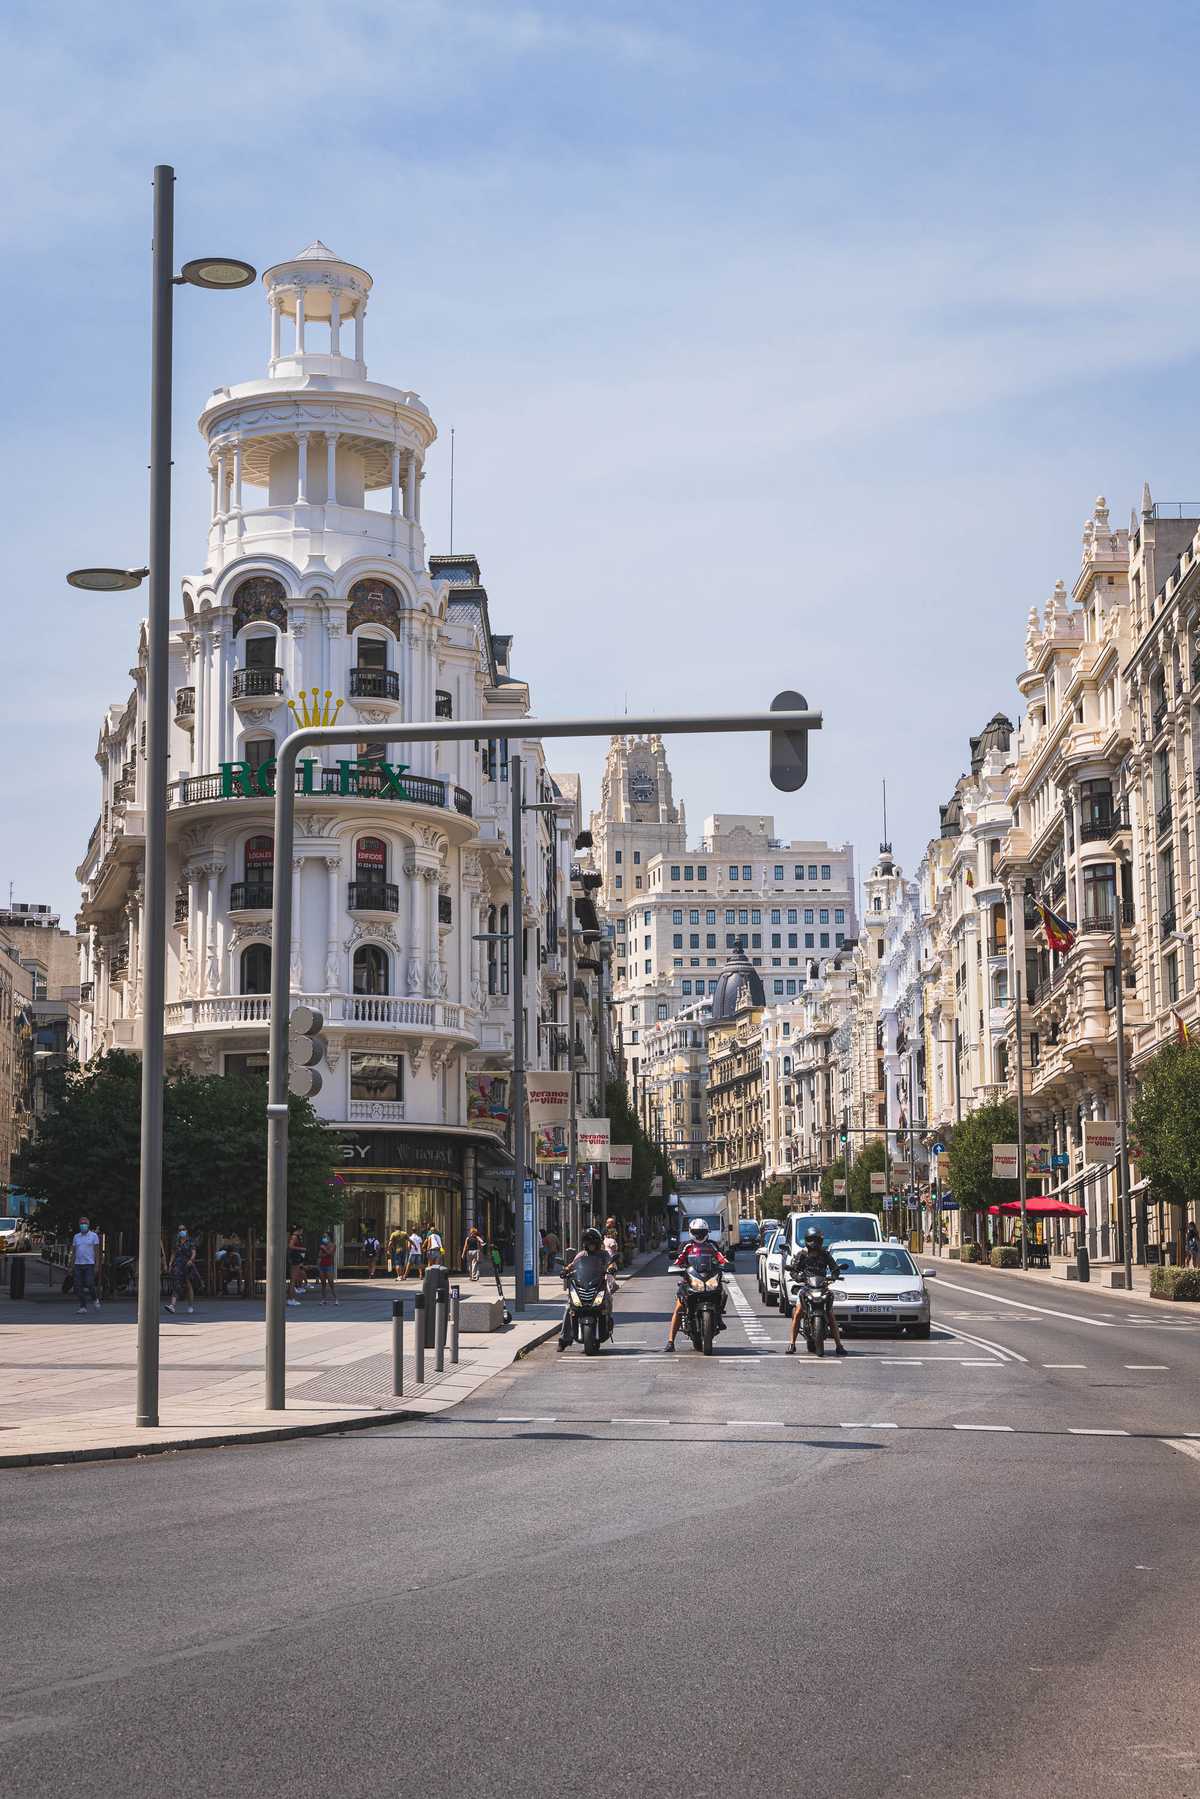 Hotels, shops, and apartments flank a busy street in Madrid